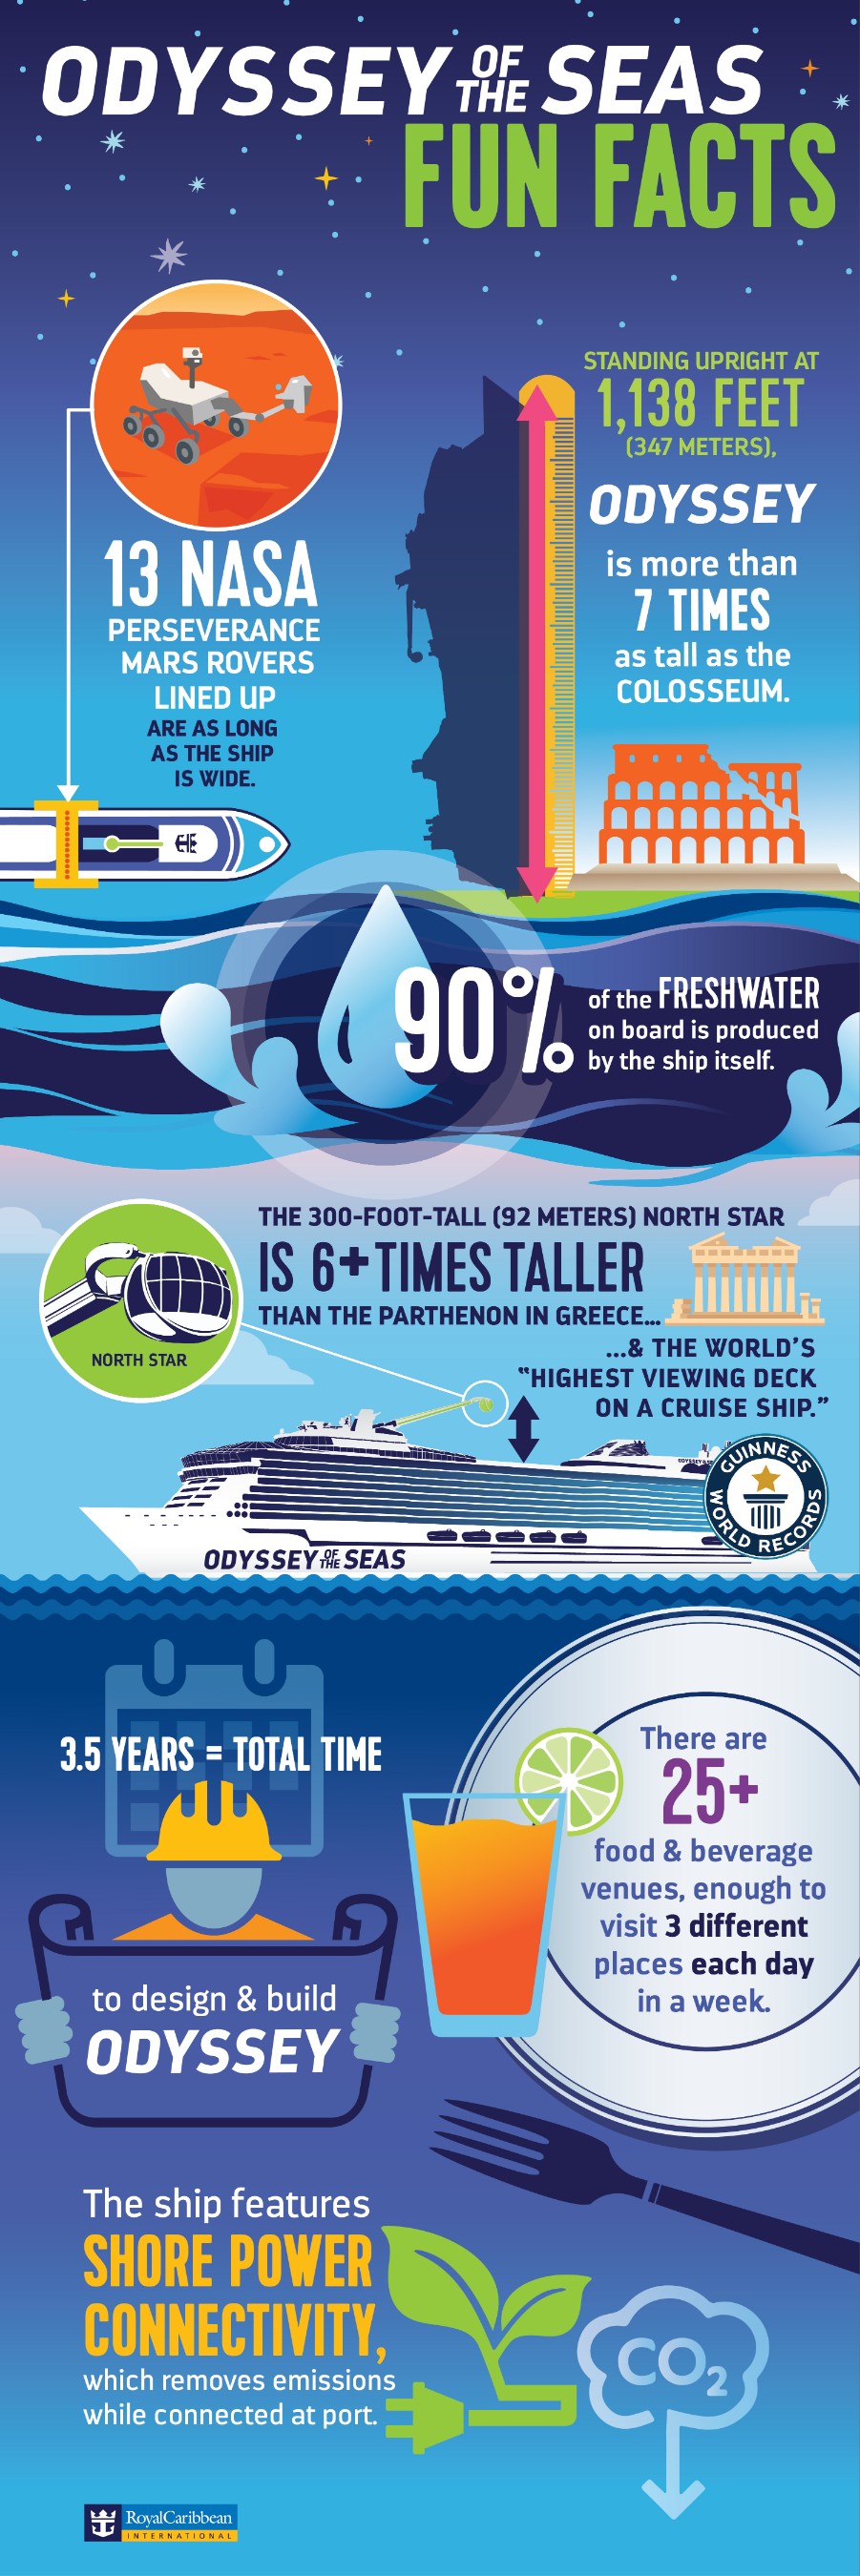 Odyssey of the Seas Infographic